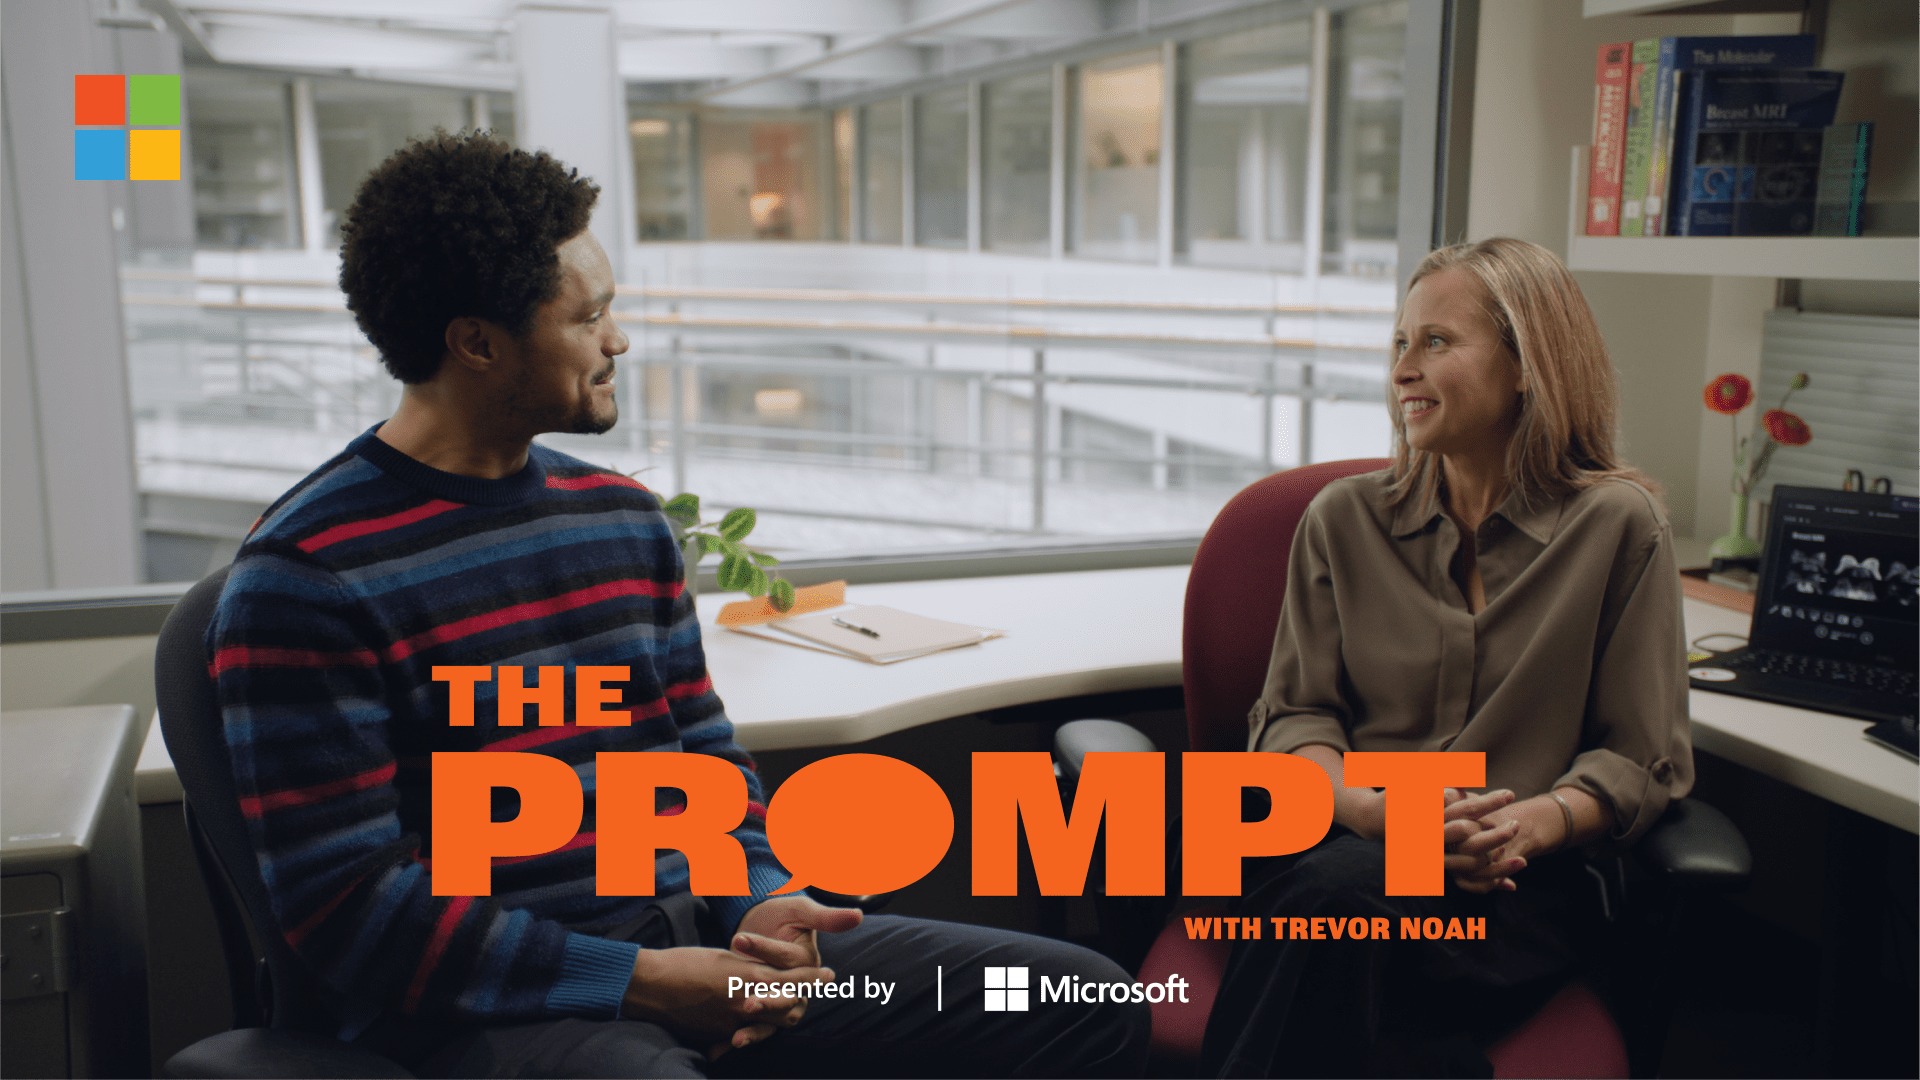 A screenshot of Trevor Noah and Dr. Savannah Partridge sitting in an office space. The text reads: The Prompt with Trevor Noah presented by Microsoft.